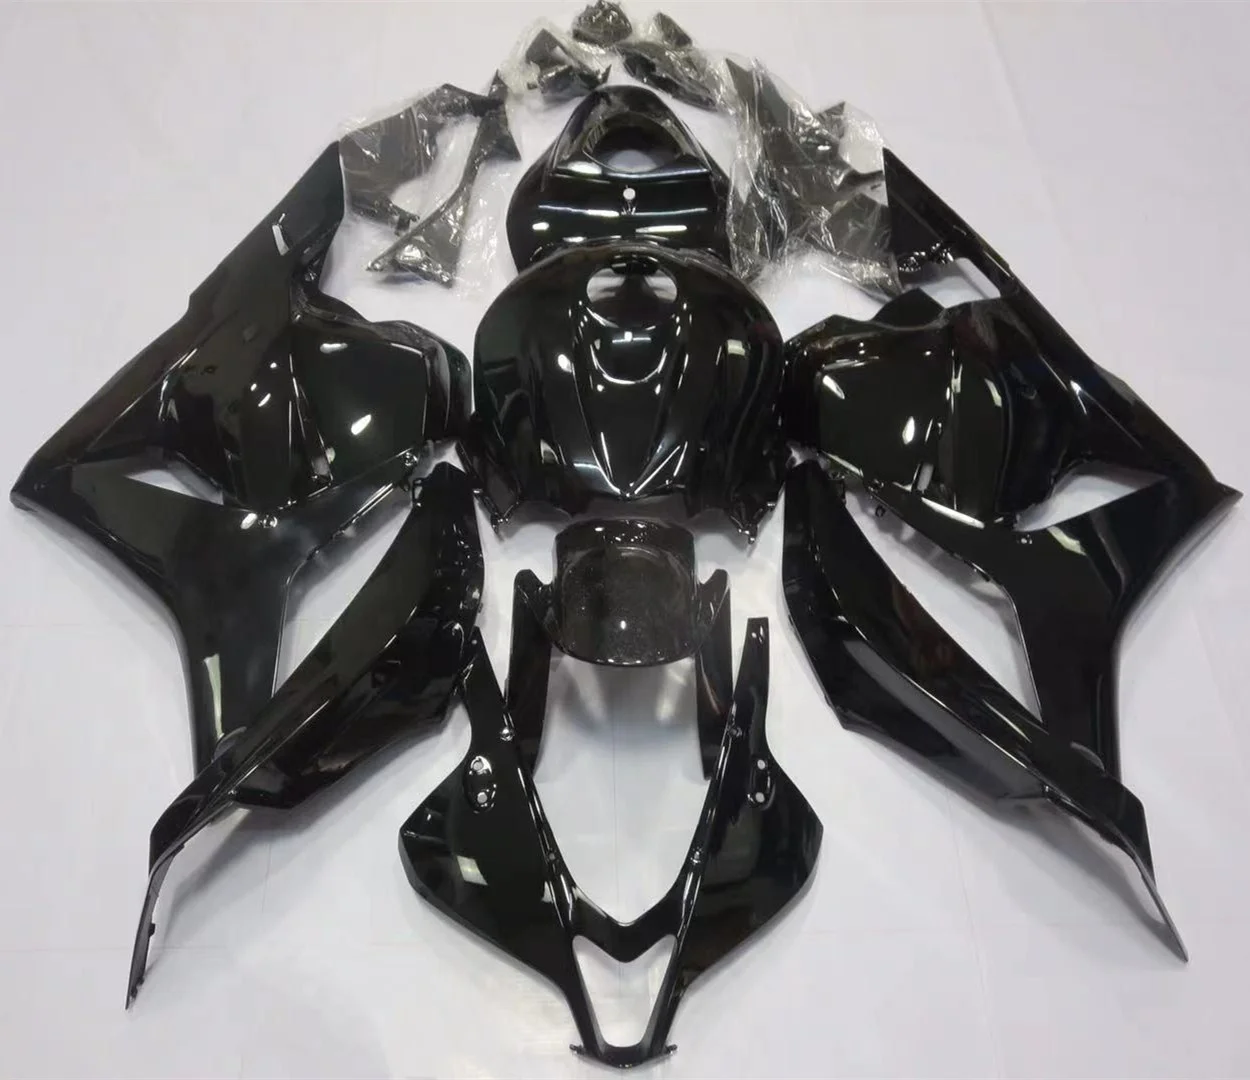 

2022 WHSC Black Motorcycle Fairing Kits For HONDA CBR600 2009-2012, Pictures shown